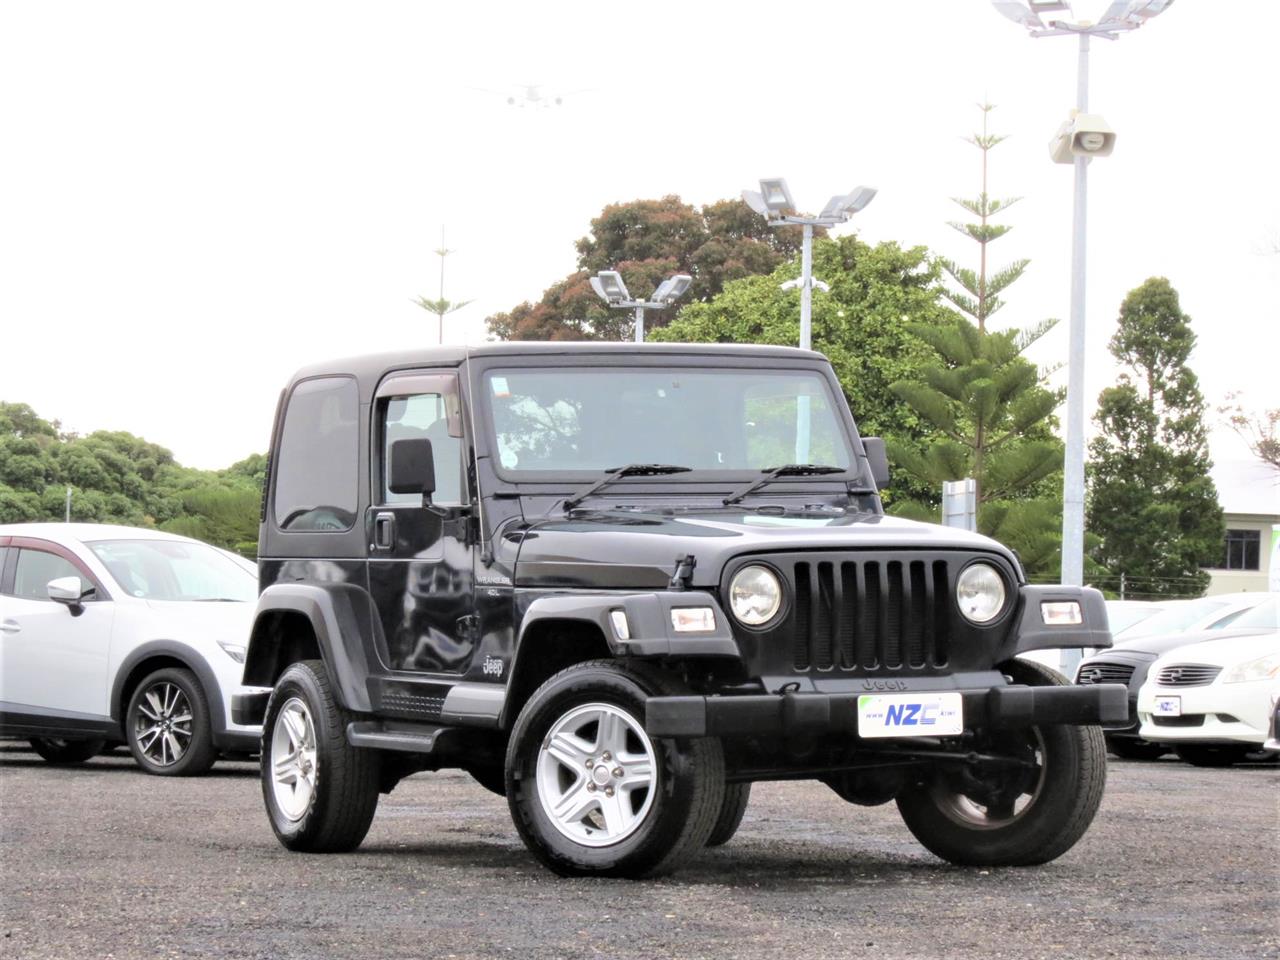 NZC 2000 Jeep WRANGLER just arrived to Auckland